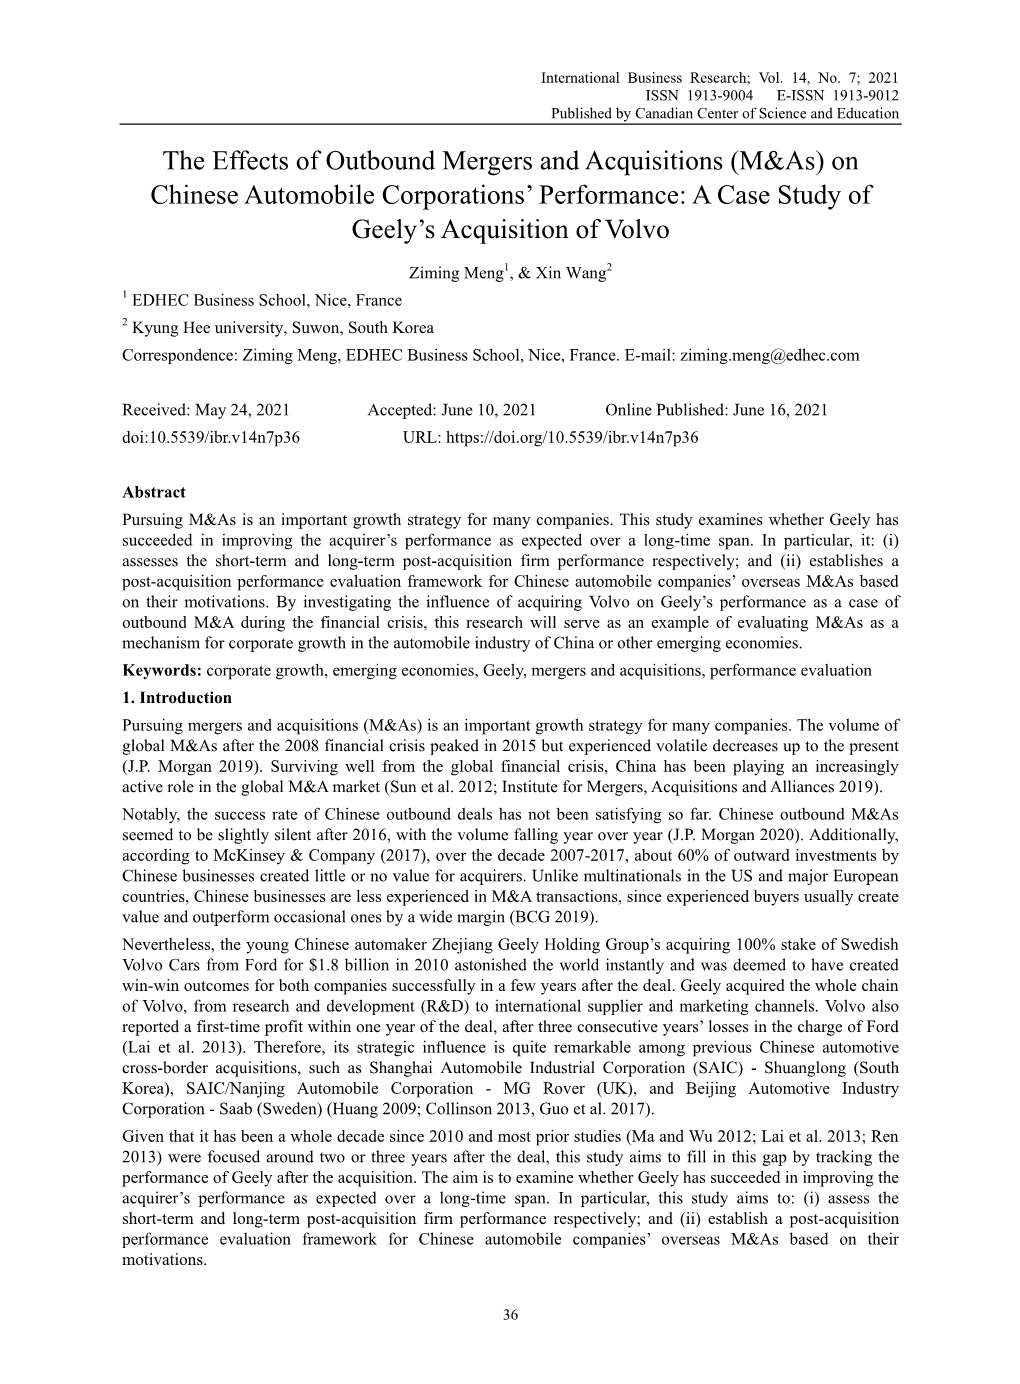 The Effects of Outbound Mergers and Acquisitions (M&As) on Chinese Automobile Corporations‟ Performance: a Case Study of Geely‟S Acquisition of Volvo